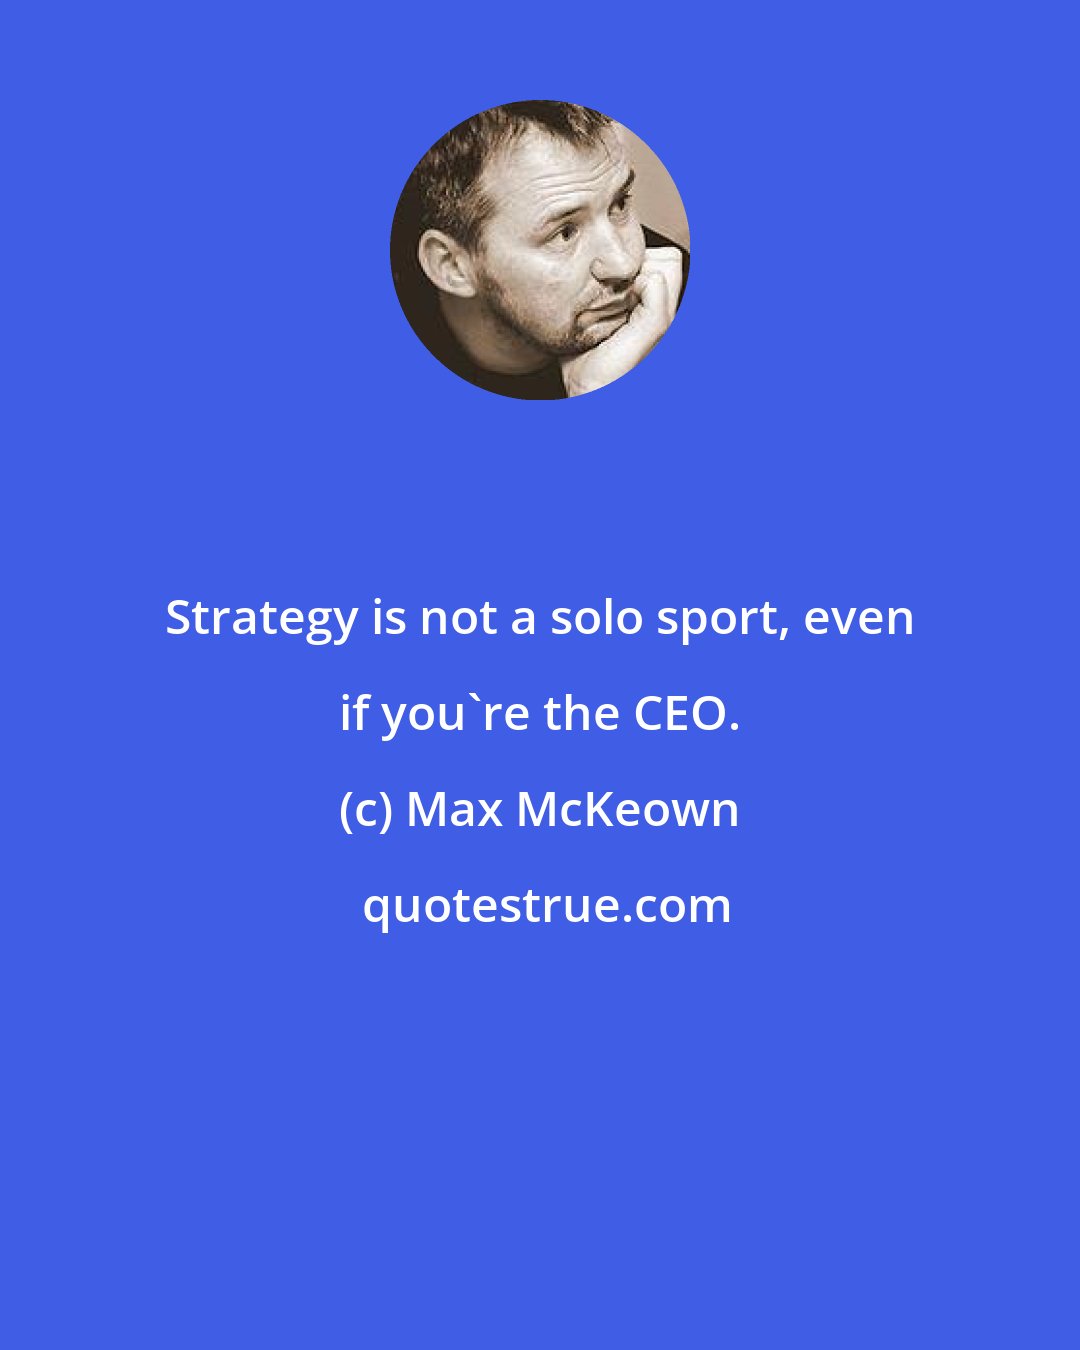 Max McKeown: Strategy is not a solo sport, even if you're the CEO.